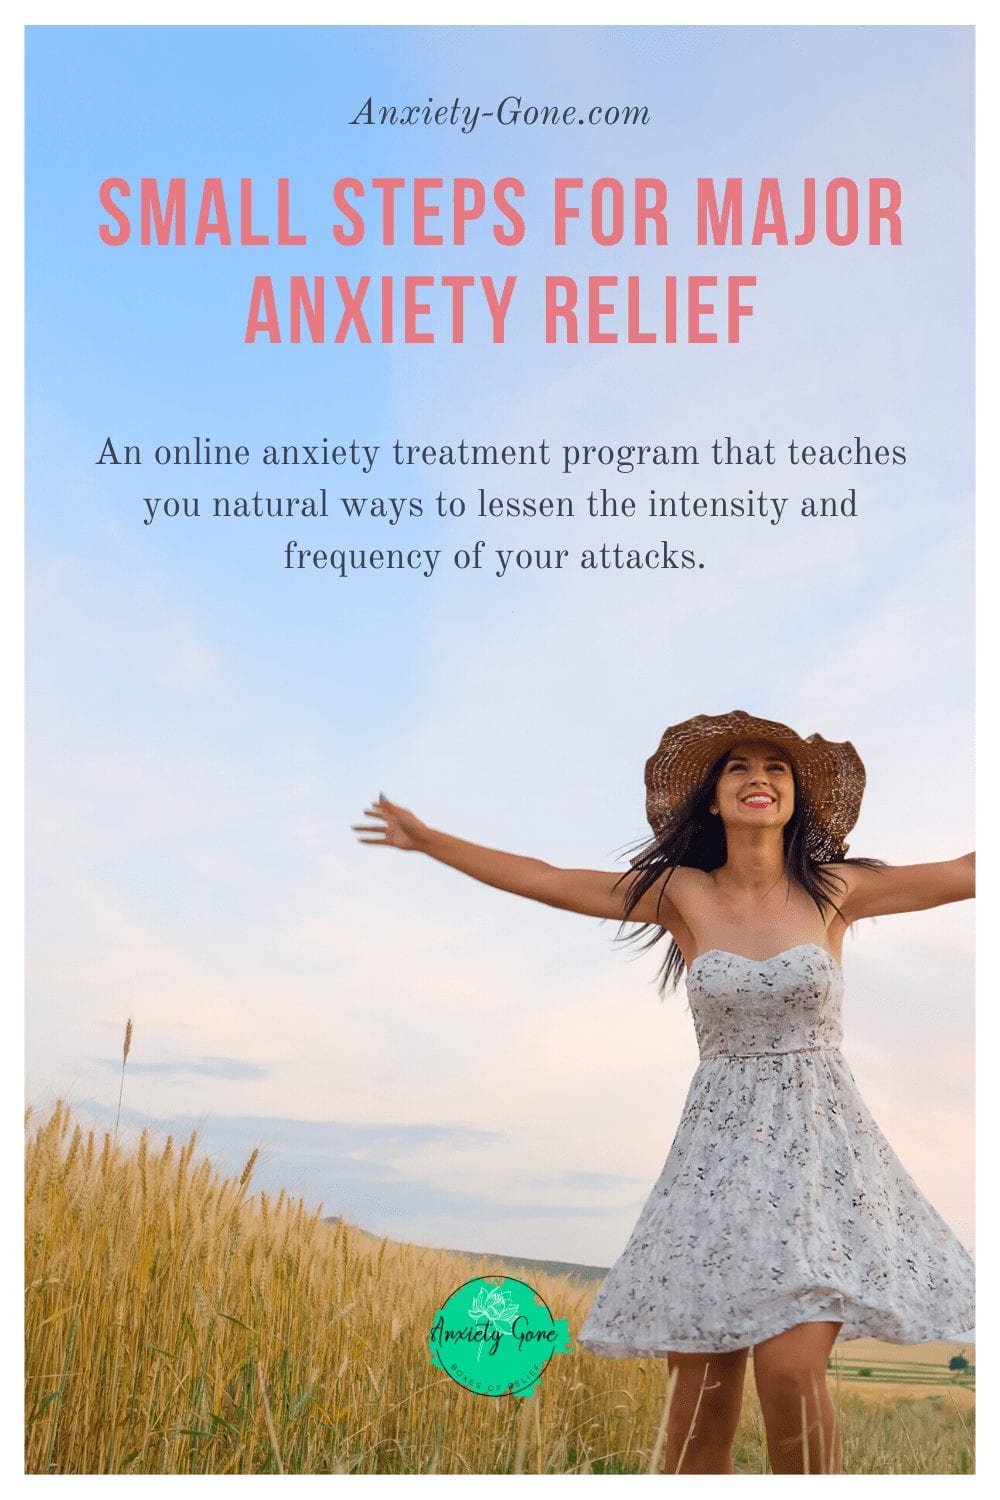 anxiety treatment, mental health therapies, how to deal with anxiety, anxiety program, treatment for anxiety, mental health treatment,